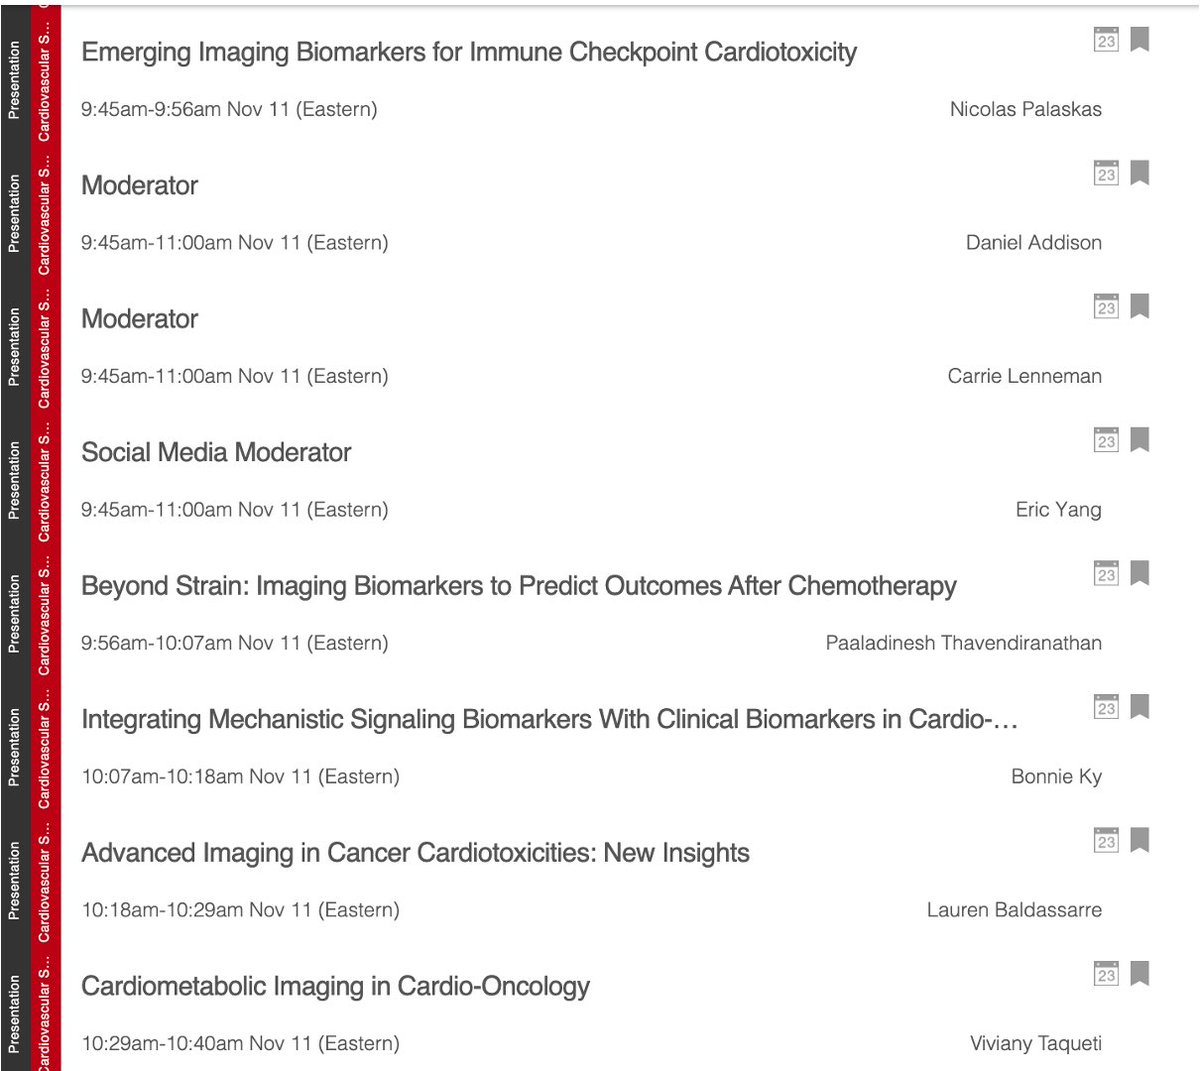 For the opening #cardioonc session at @AHAMeetings #AHA23 at 945AM! Hear from experts on the latest advances in cardiac imaging biomarkers in CTX risk stratification & detection! As social media moderator, I will cover ?/comments on X. Please comment in this 🧵! @AHAScience